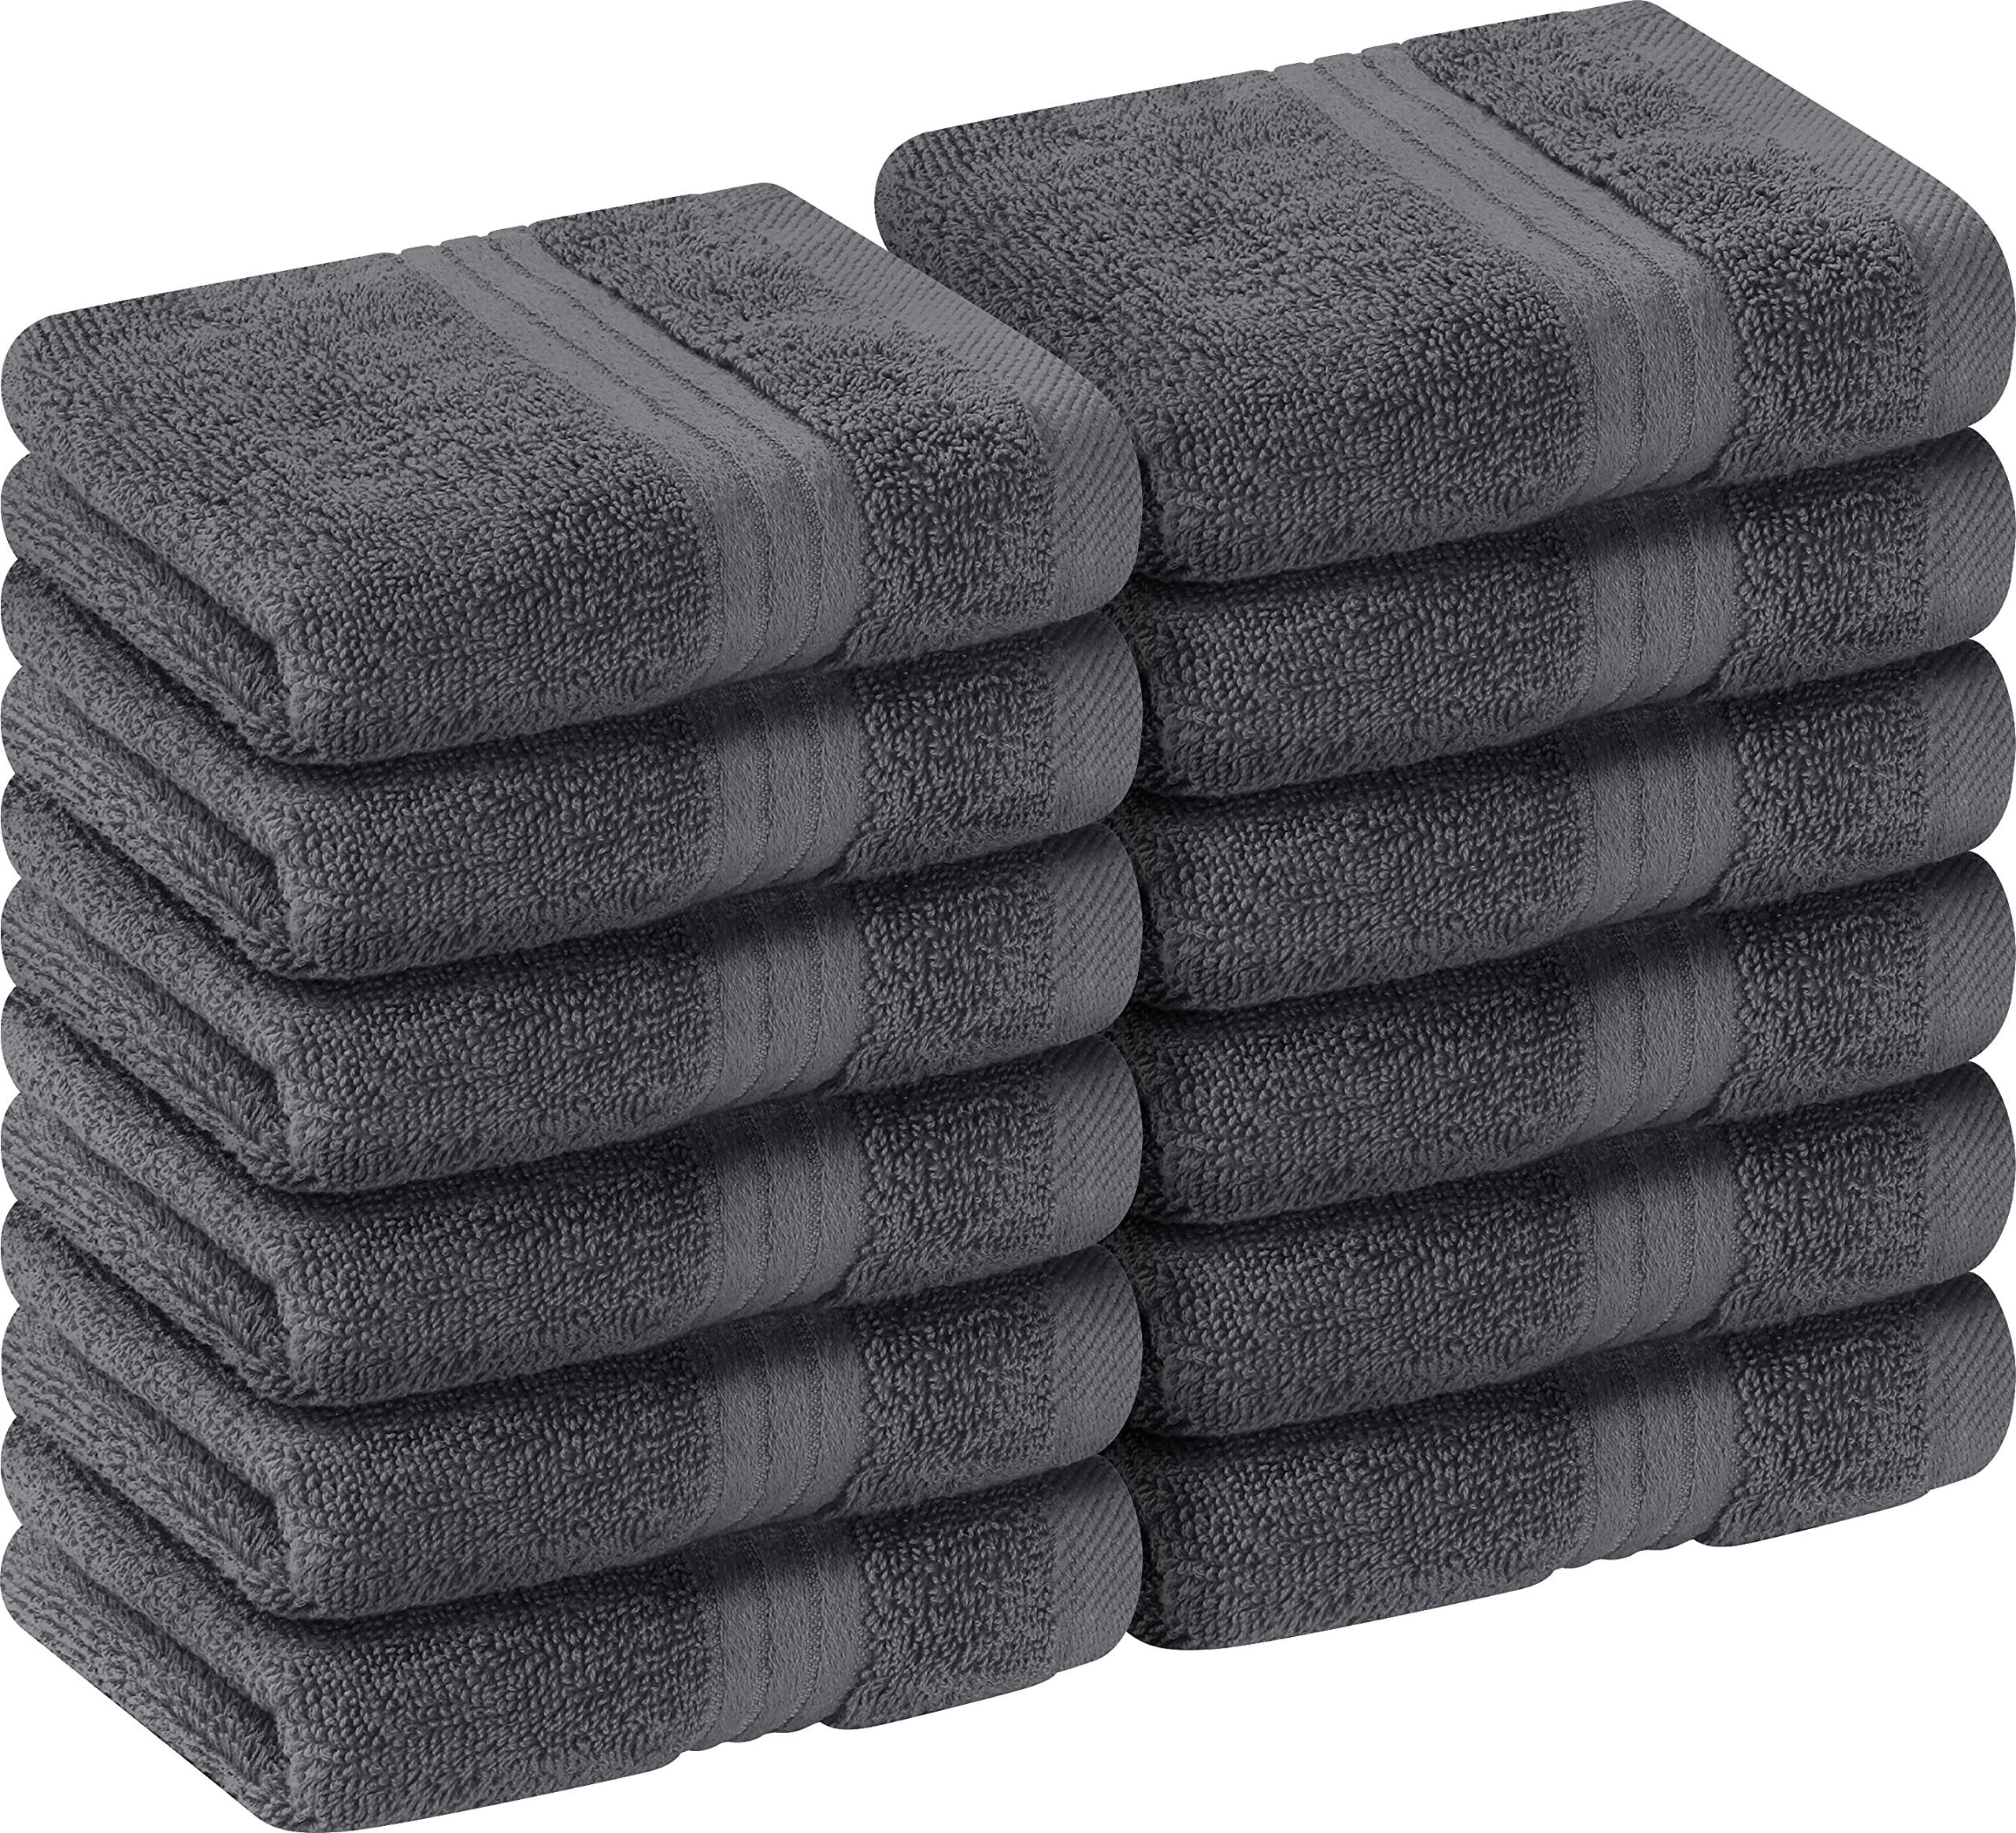 Book Cover Utopia Towels (12 Pack) Luxury Wash Cloths Set (12 x 12 Inches) 600 GSM 100% Cotton Ring Spun, Highly Absorbent and Soft Feel Washcloths for Bathroom, Spa, Gym, and Face Towel (Grey) 12 Pack Grey